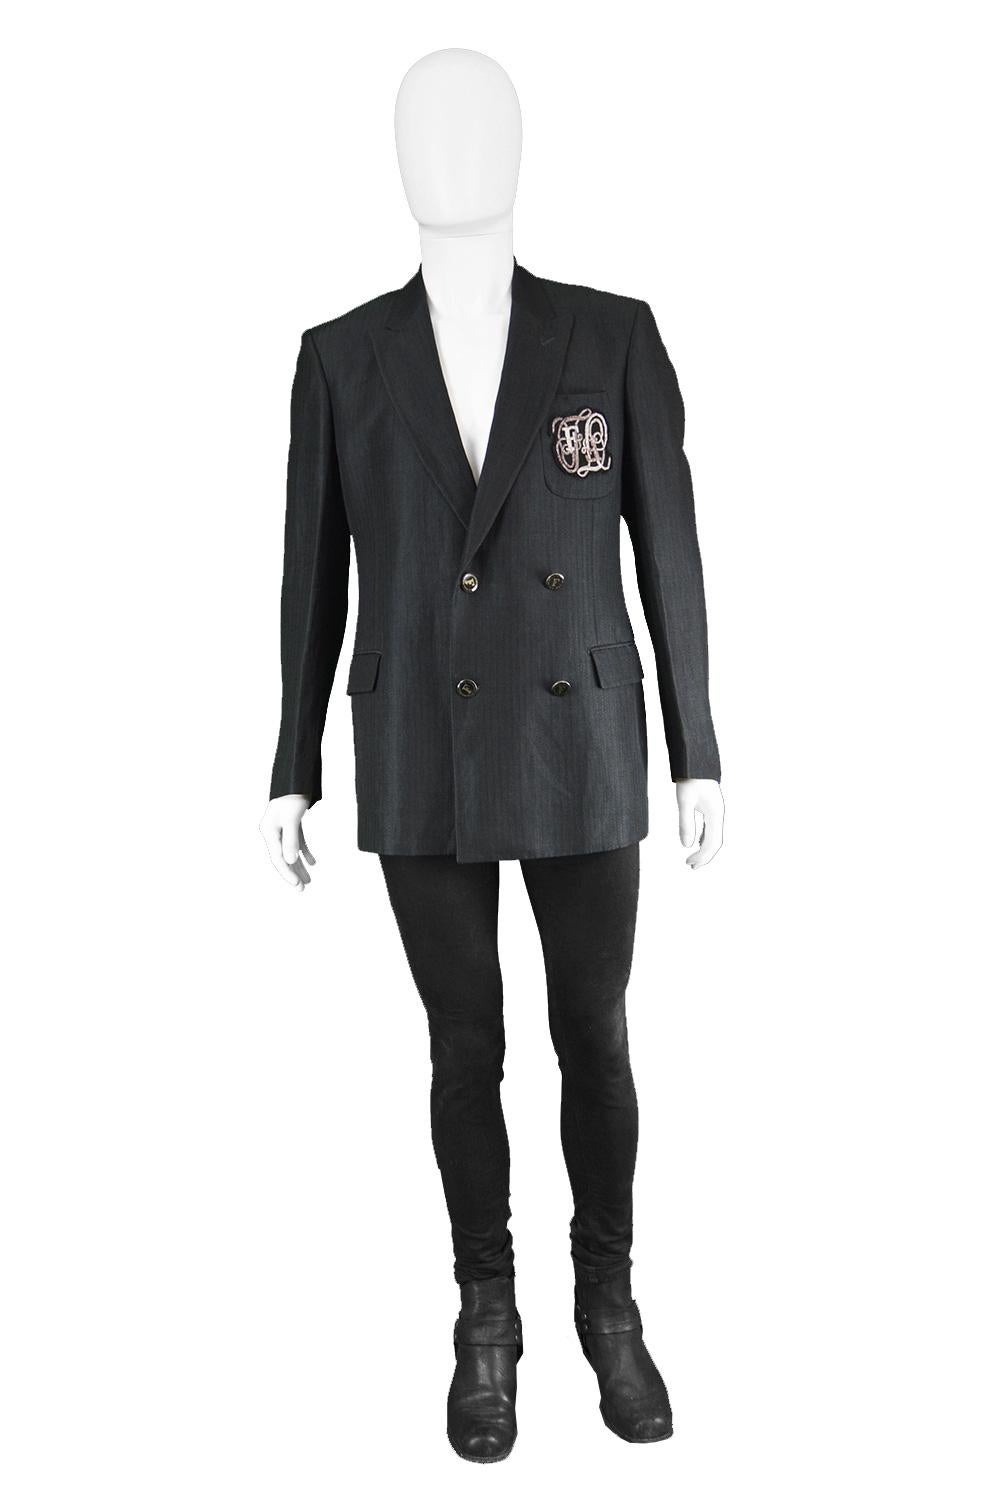 Gianfranco Ferré Men's Embroidered Wool & Ramie Double Breasted Blazer Jacket

Size: Marked 50 which is roughly a men's Medium. Please check measurements.
Chest - 42” / 106cm (allow a couple of inches room for movement)
Waist - 38” / 96cm
Length